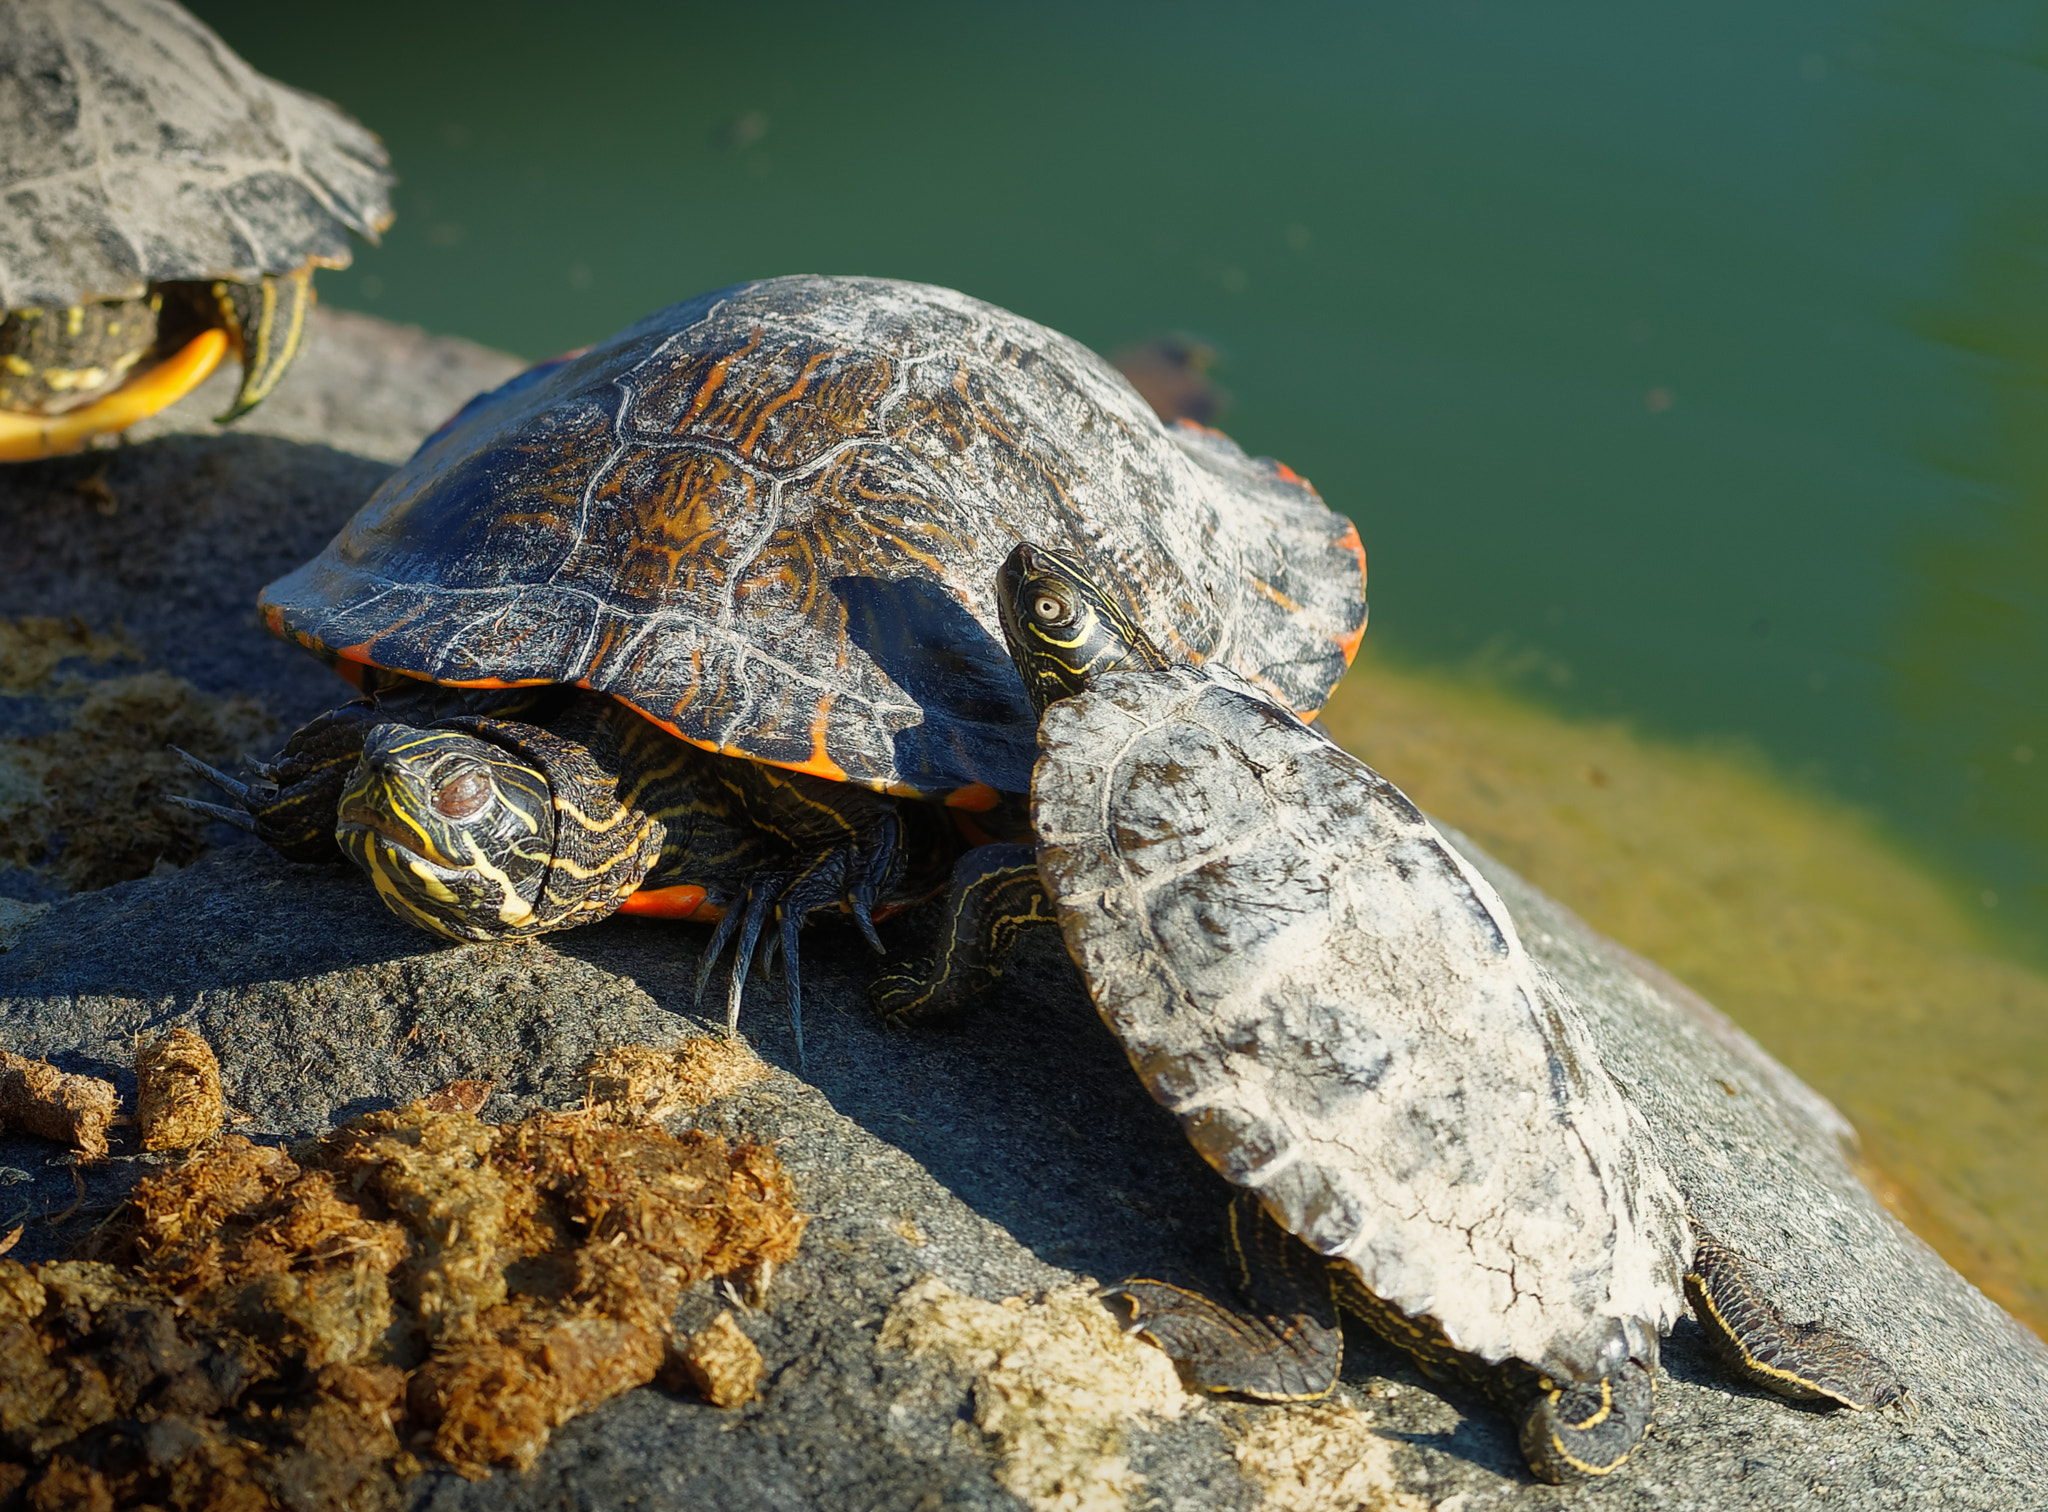 Sony a7 II sample photo. Two turtles photography